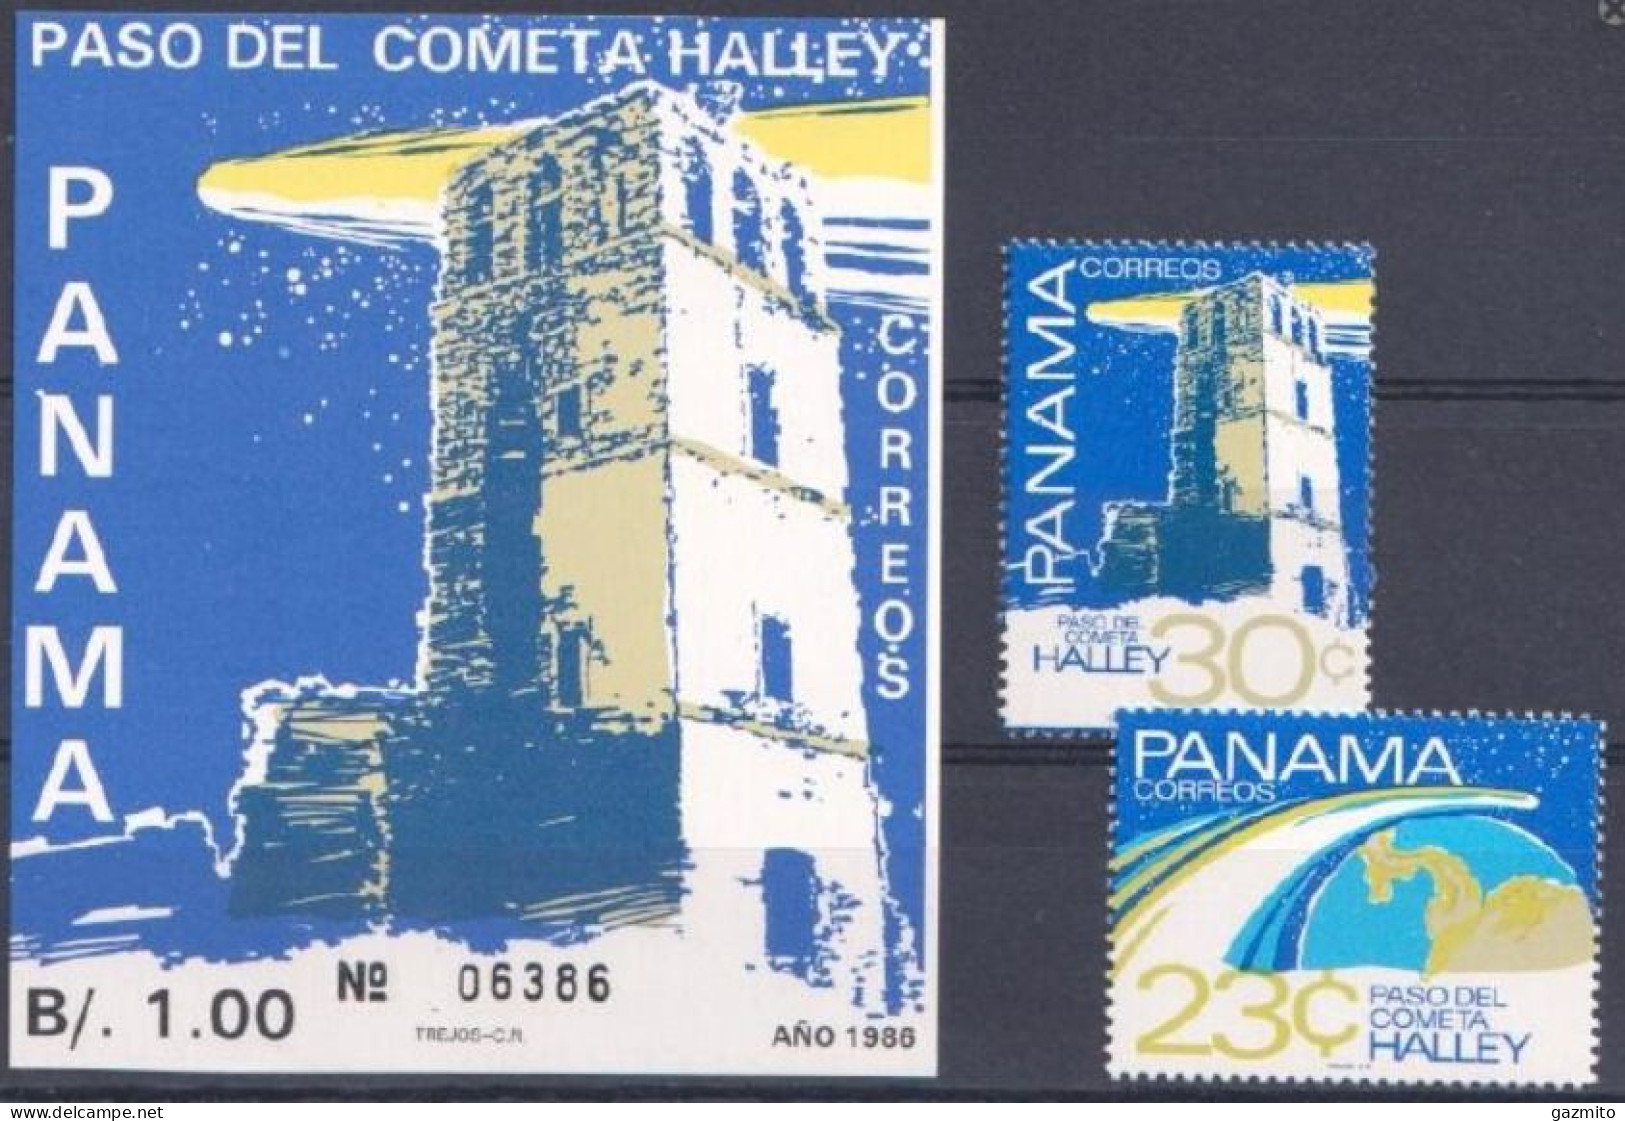 Panama 1986, Appearance Of Halley's Comet, 2val+BF - Astronomy